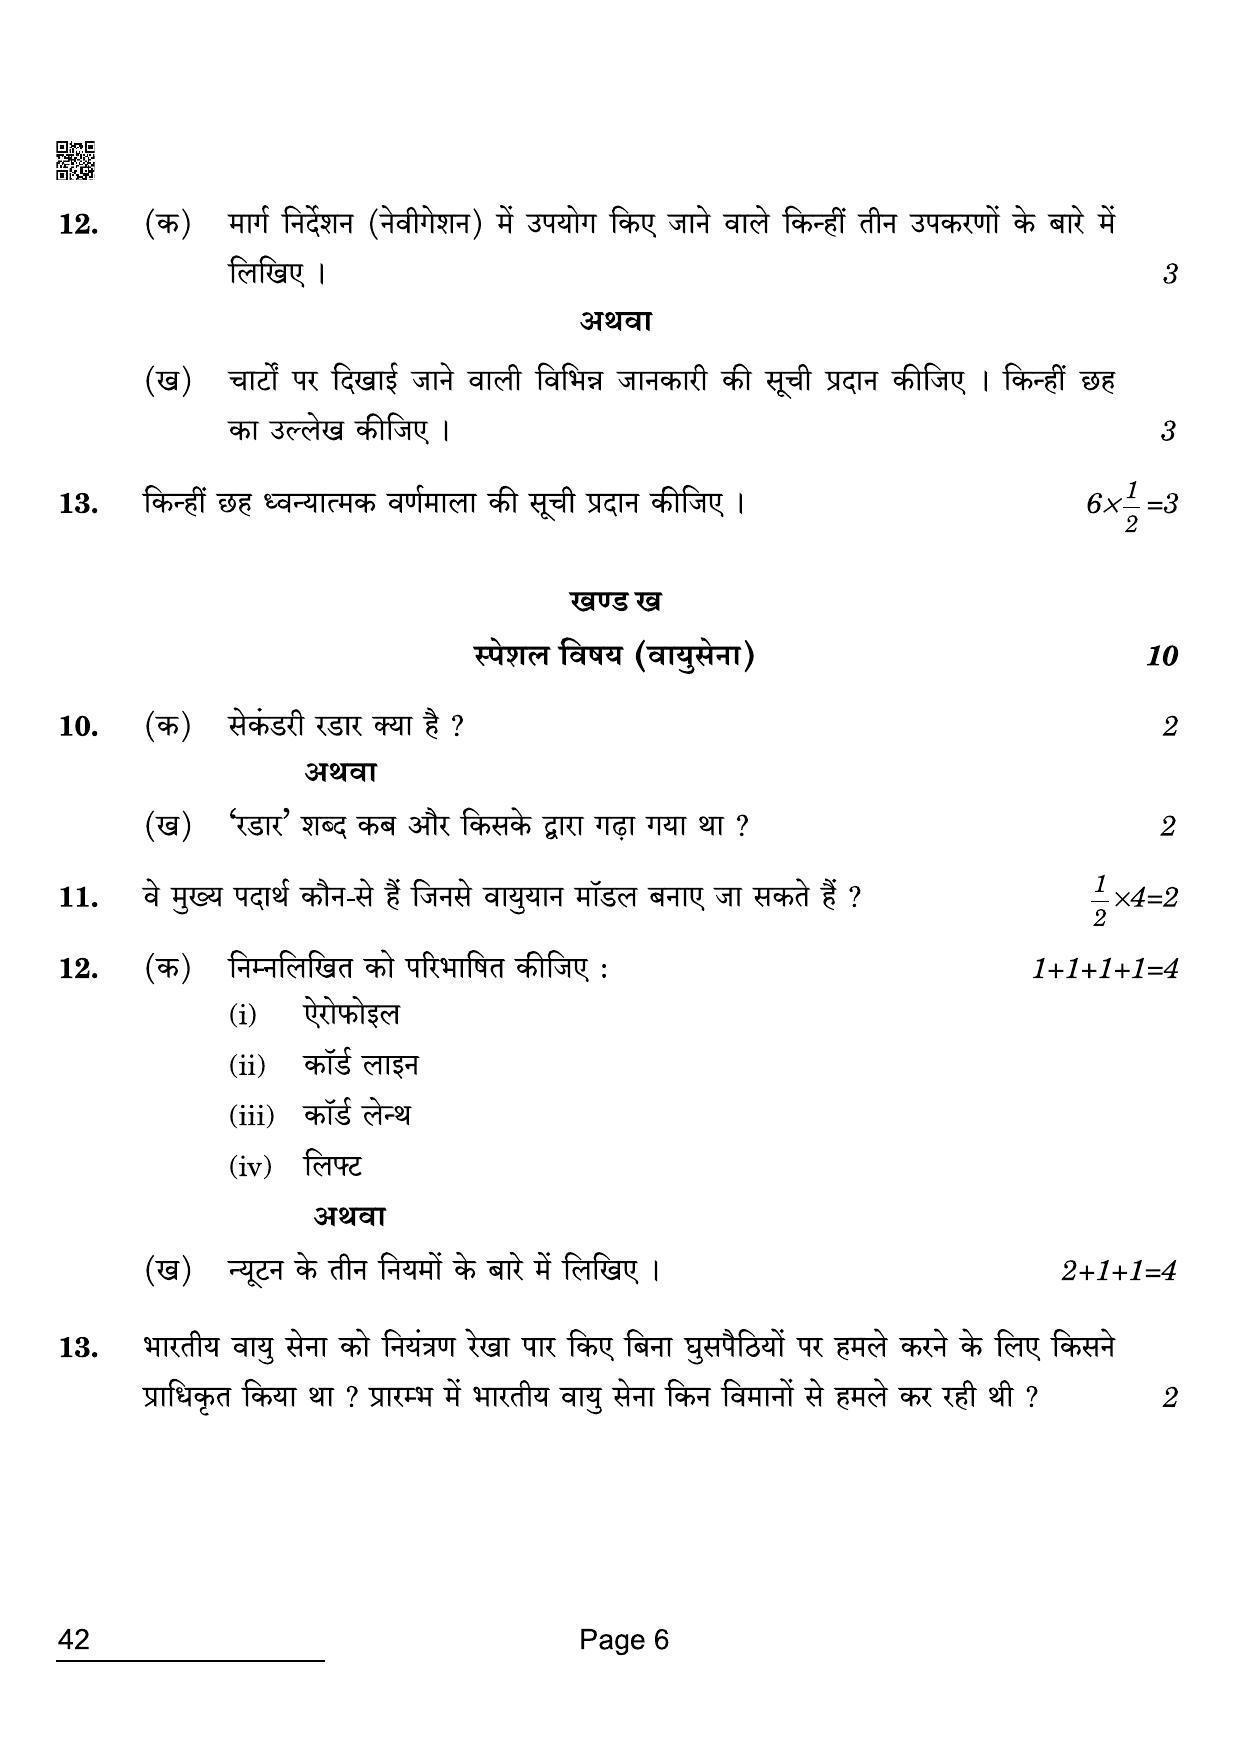 CBSE Class 12 42 NCC 2022 Compartment Question Paper - Page 6